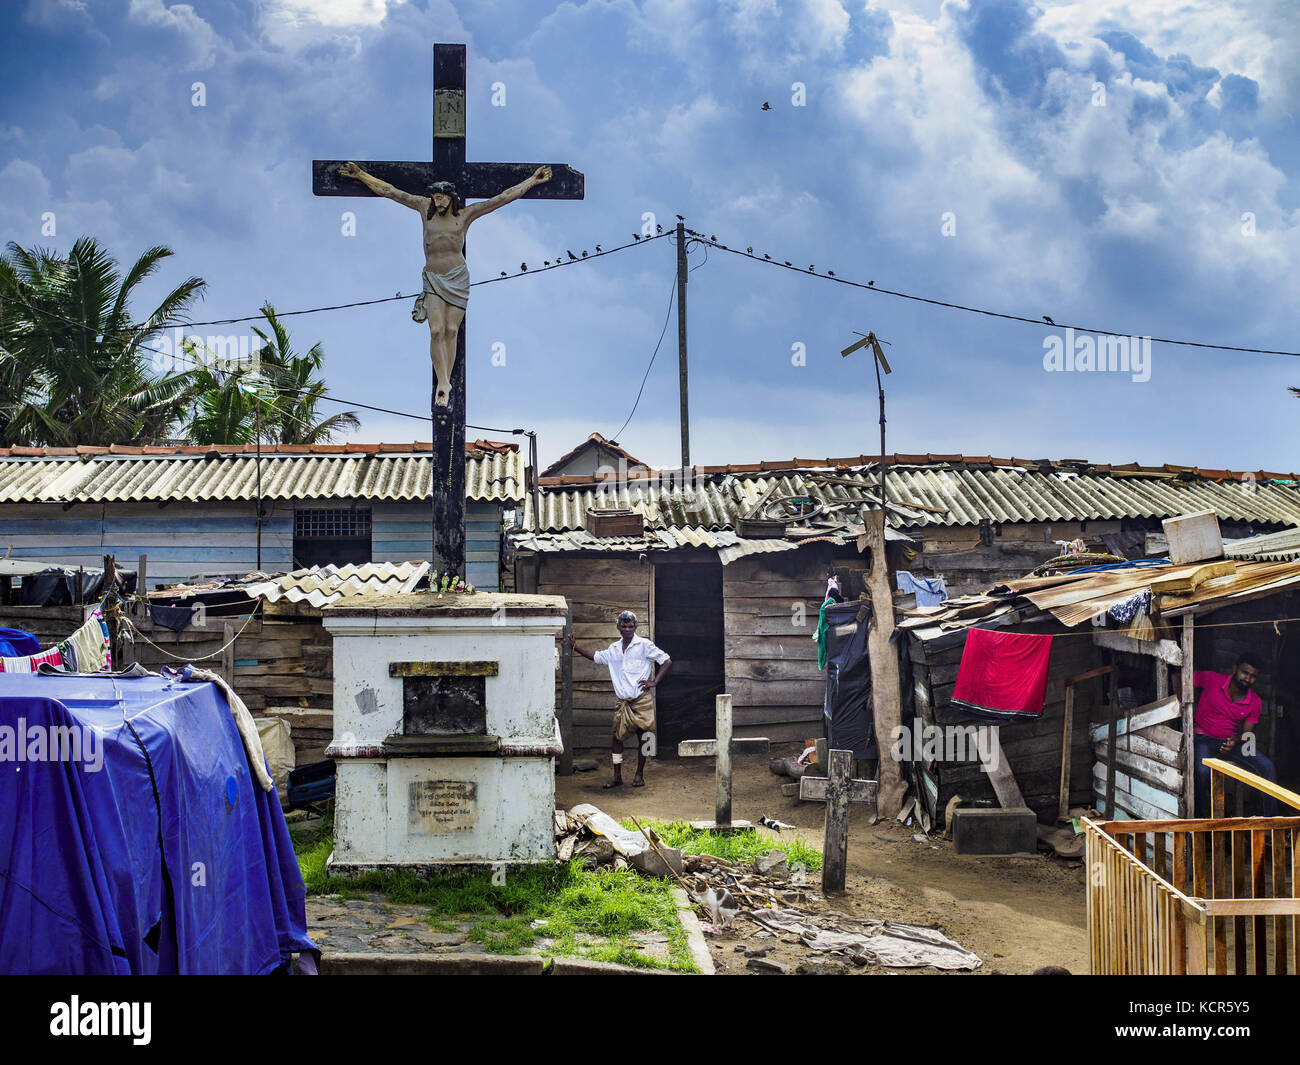 Koralawella, Western Province, Sri Lanka. 7th Oct, 2017. A crucifix in a Catholic fishing village about 40 minutes south of Colombo. Fishing is an important economic activity for many of the people in coastal Sri Lanka. The crosses next to the crucifix mark the graves of people killed in the 2004 Boxing Day Tsunami. Credit: Jack Kurtz/ZUMA Wire/Alamy Live News Stock Photo